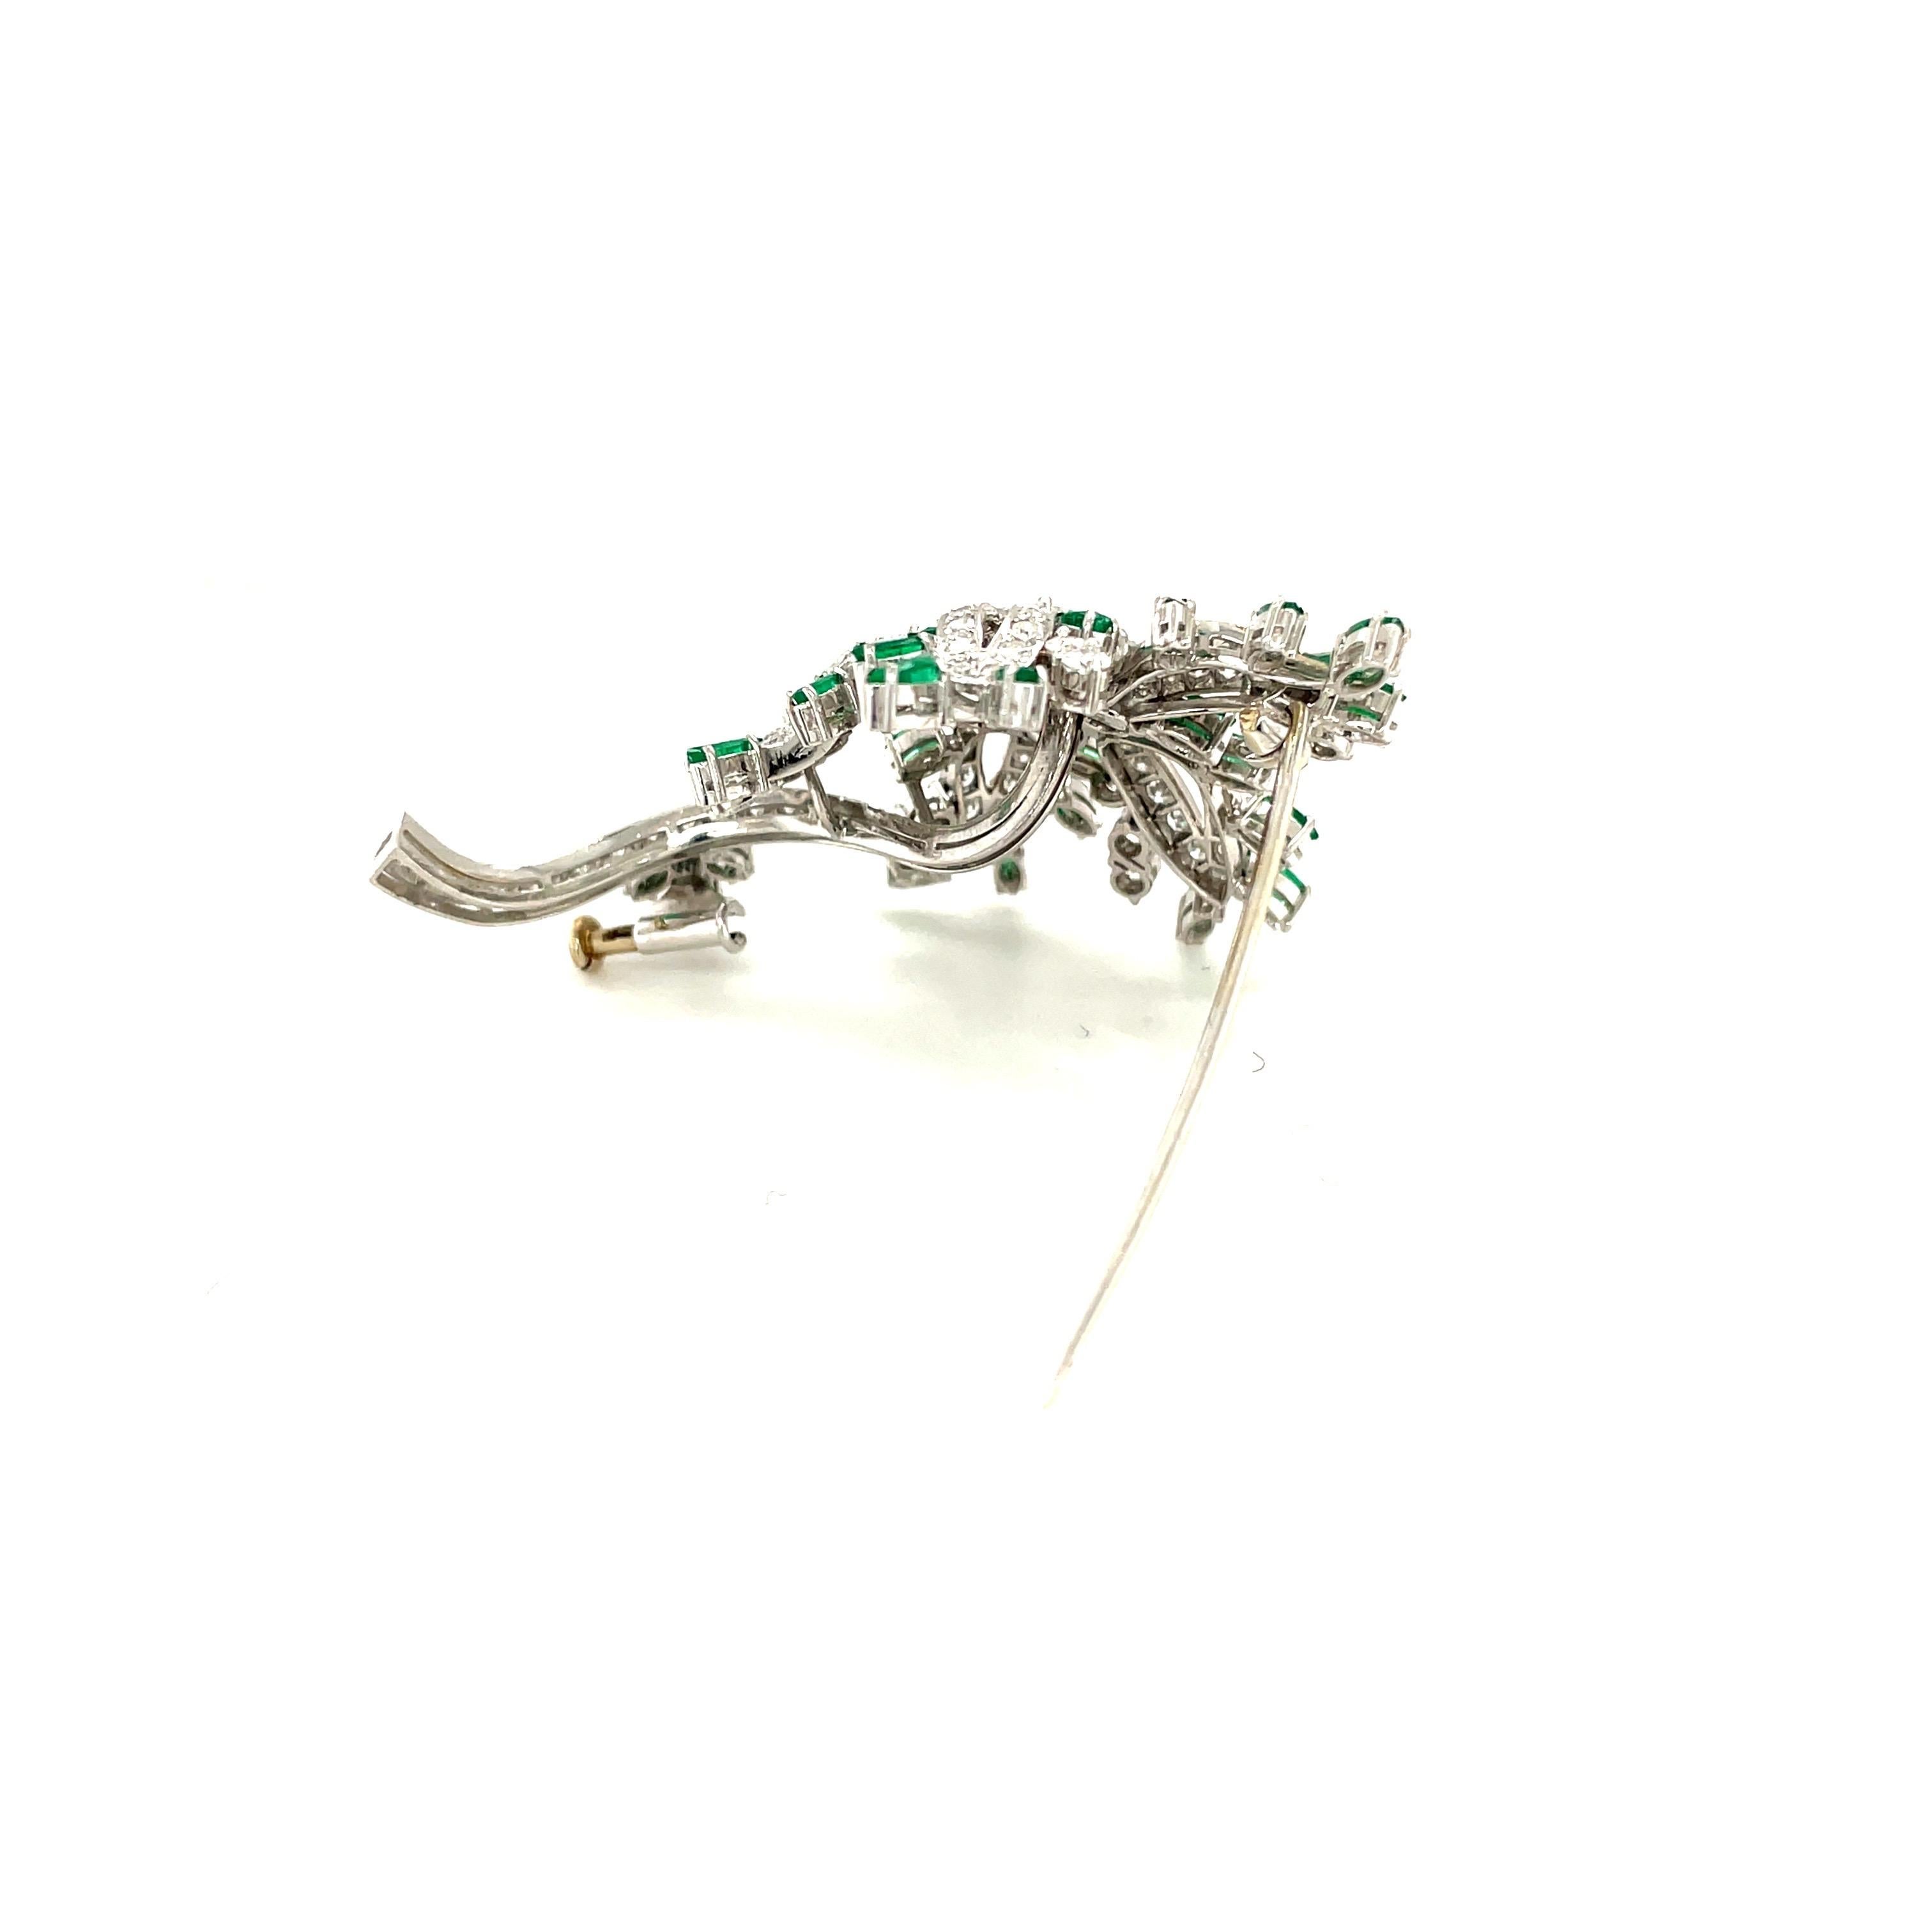 Beautiful 18 karat white gold classic brooch. This flower brooch is magnificently set with 6 round brilliant diamonds in it's center, and 98 round brilliant diamonds are set as the leaves and stem. The flower is tipped with 25 marquise cut emeralds.